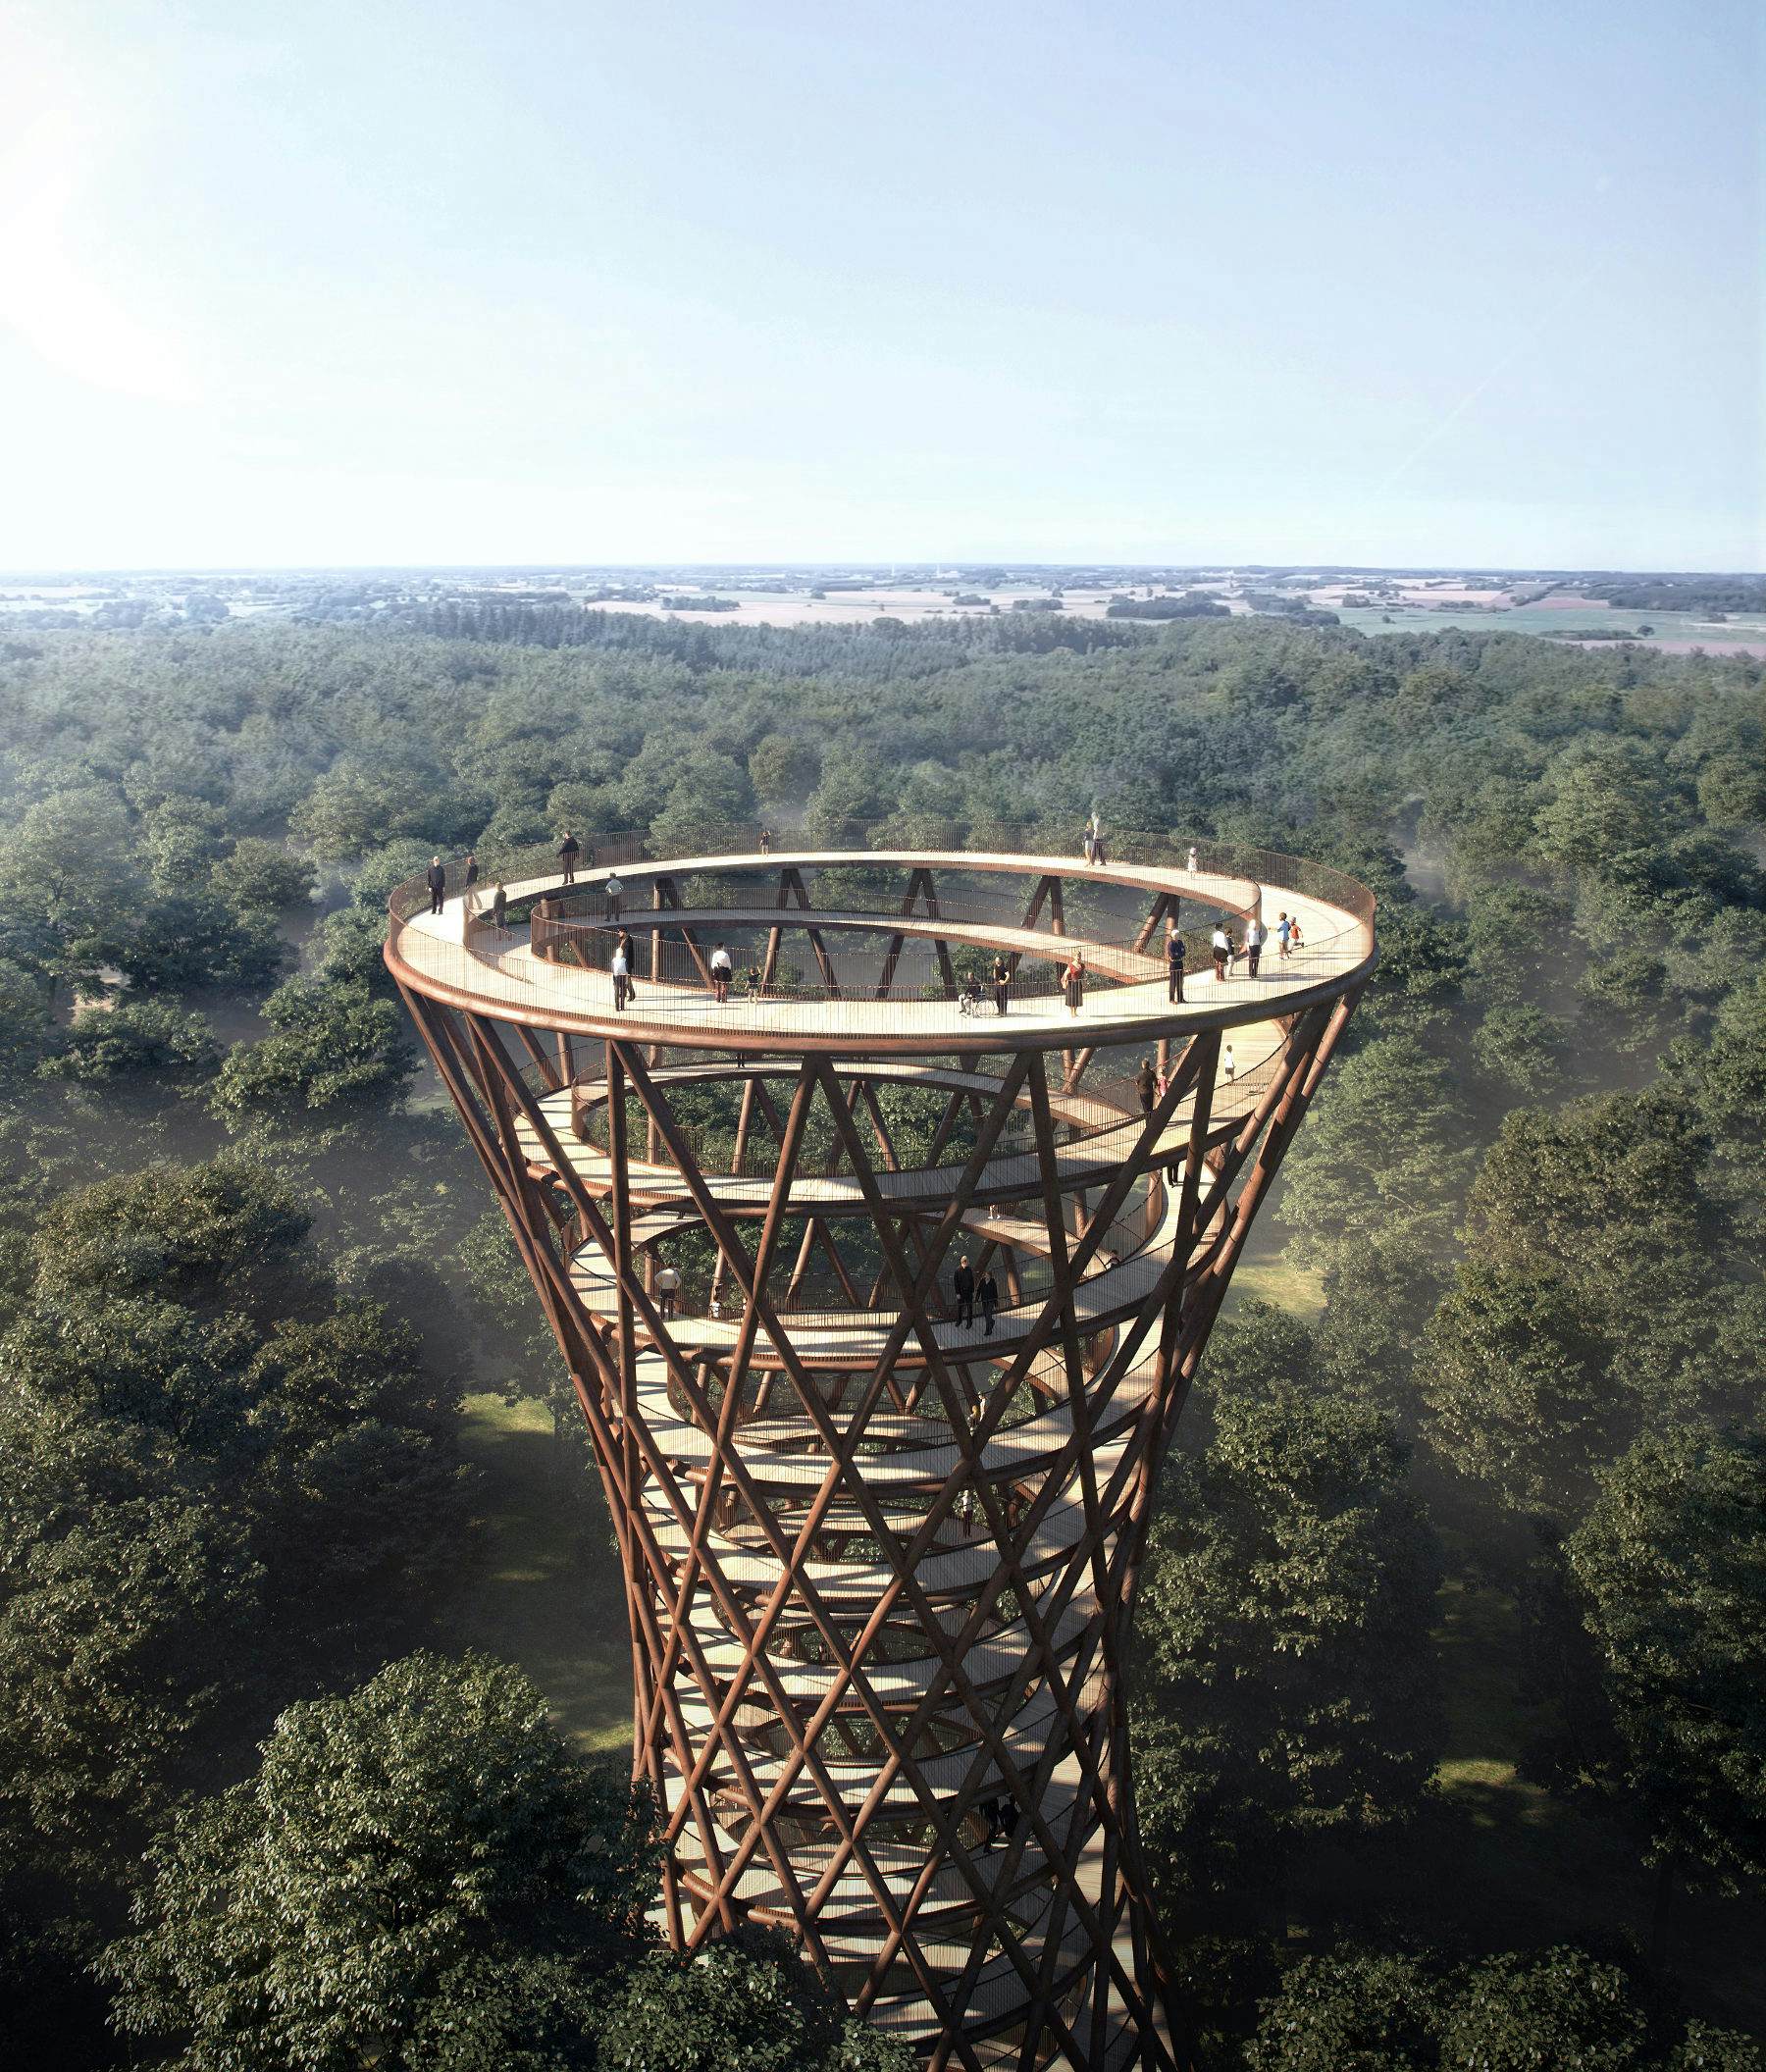 Plans unveiled for spiral treetop walkway Denmark -